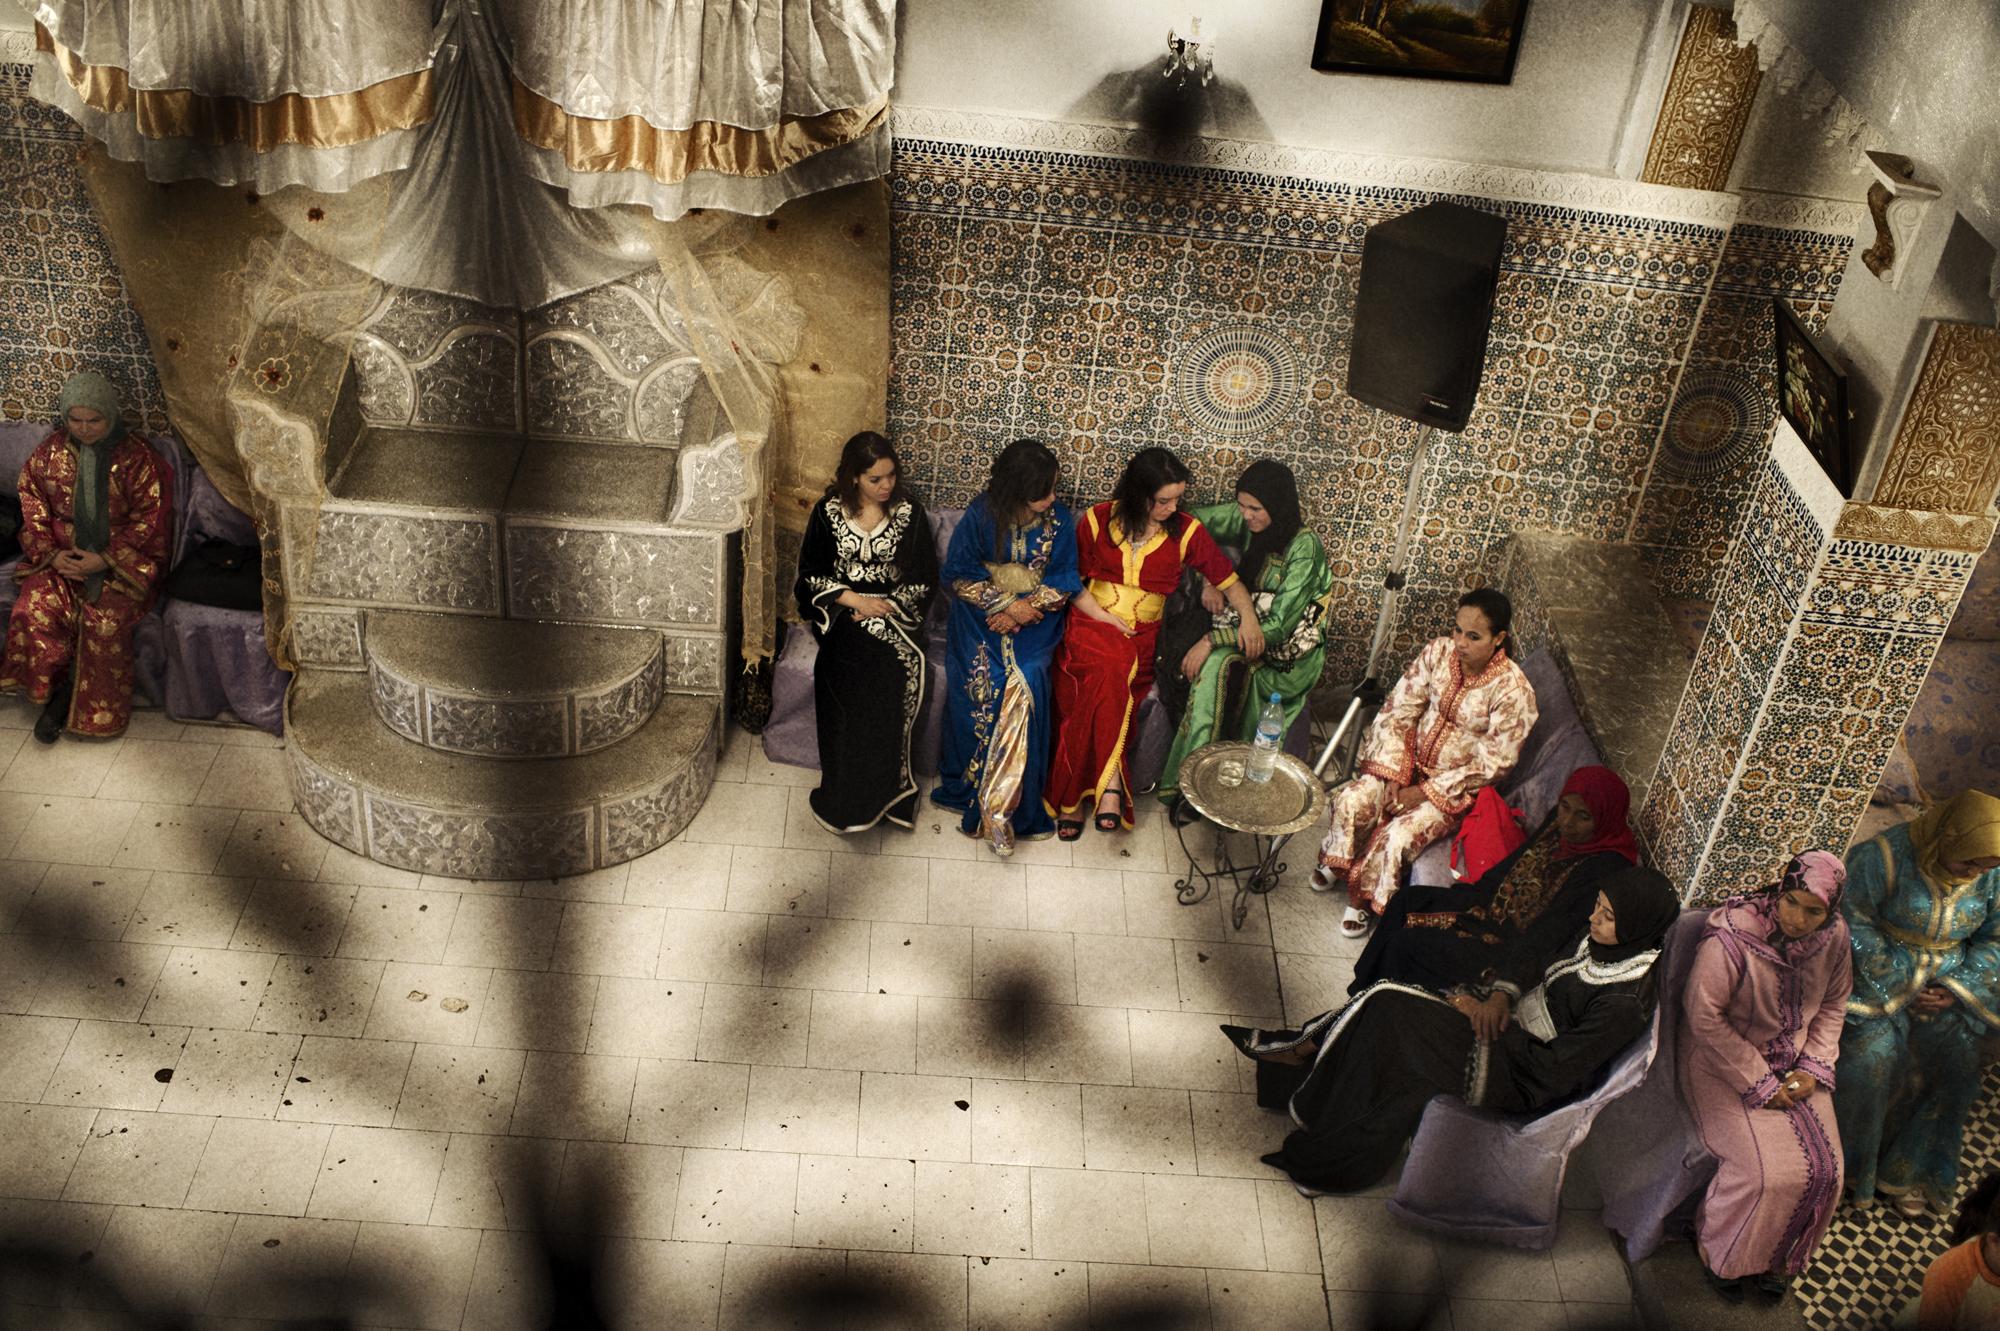 Microcredit / Morocco - Morocco, Fez. November 2011.
A wedding party prepared by...